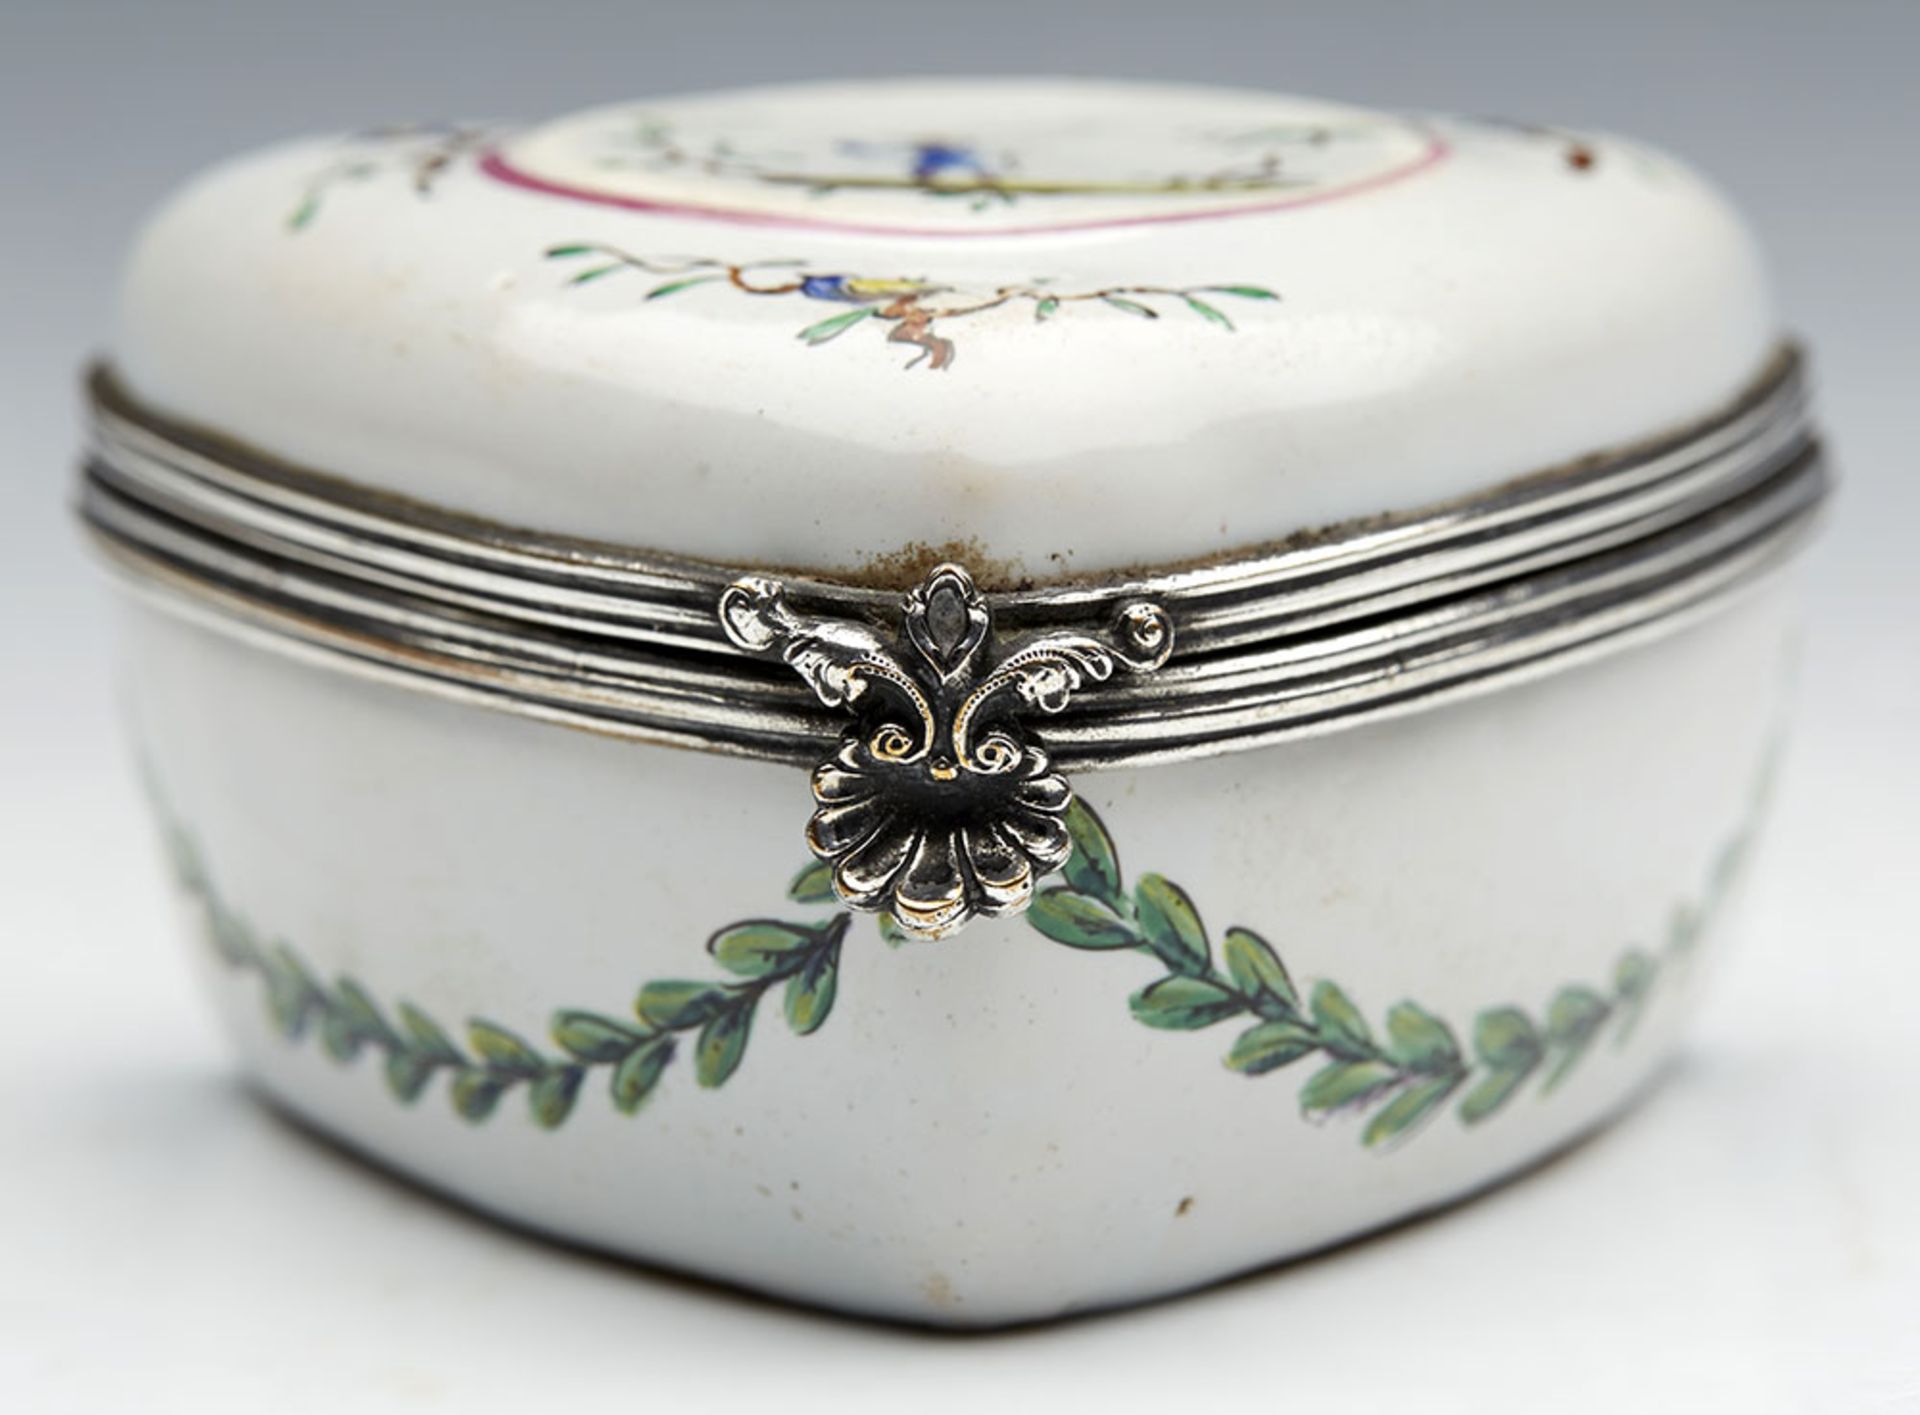 ANTIQUE FRENCH FAIENCE SCEAUX PAINTED FISHERMAN LIDDED BOX 18TH C.